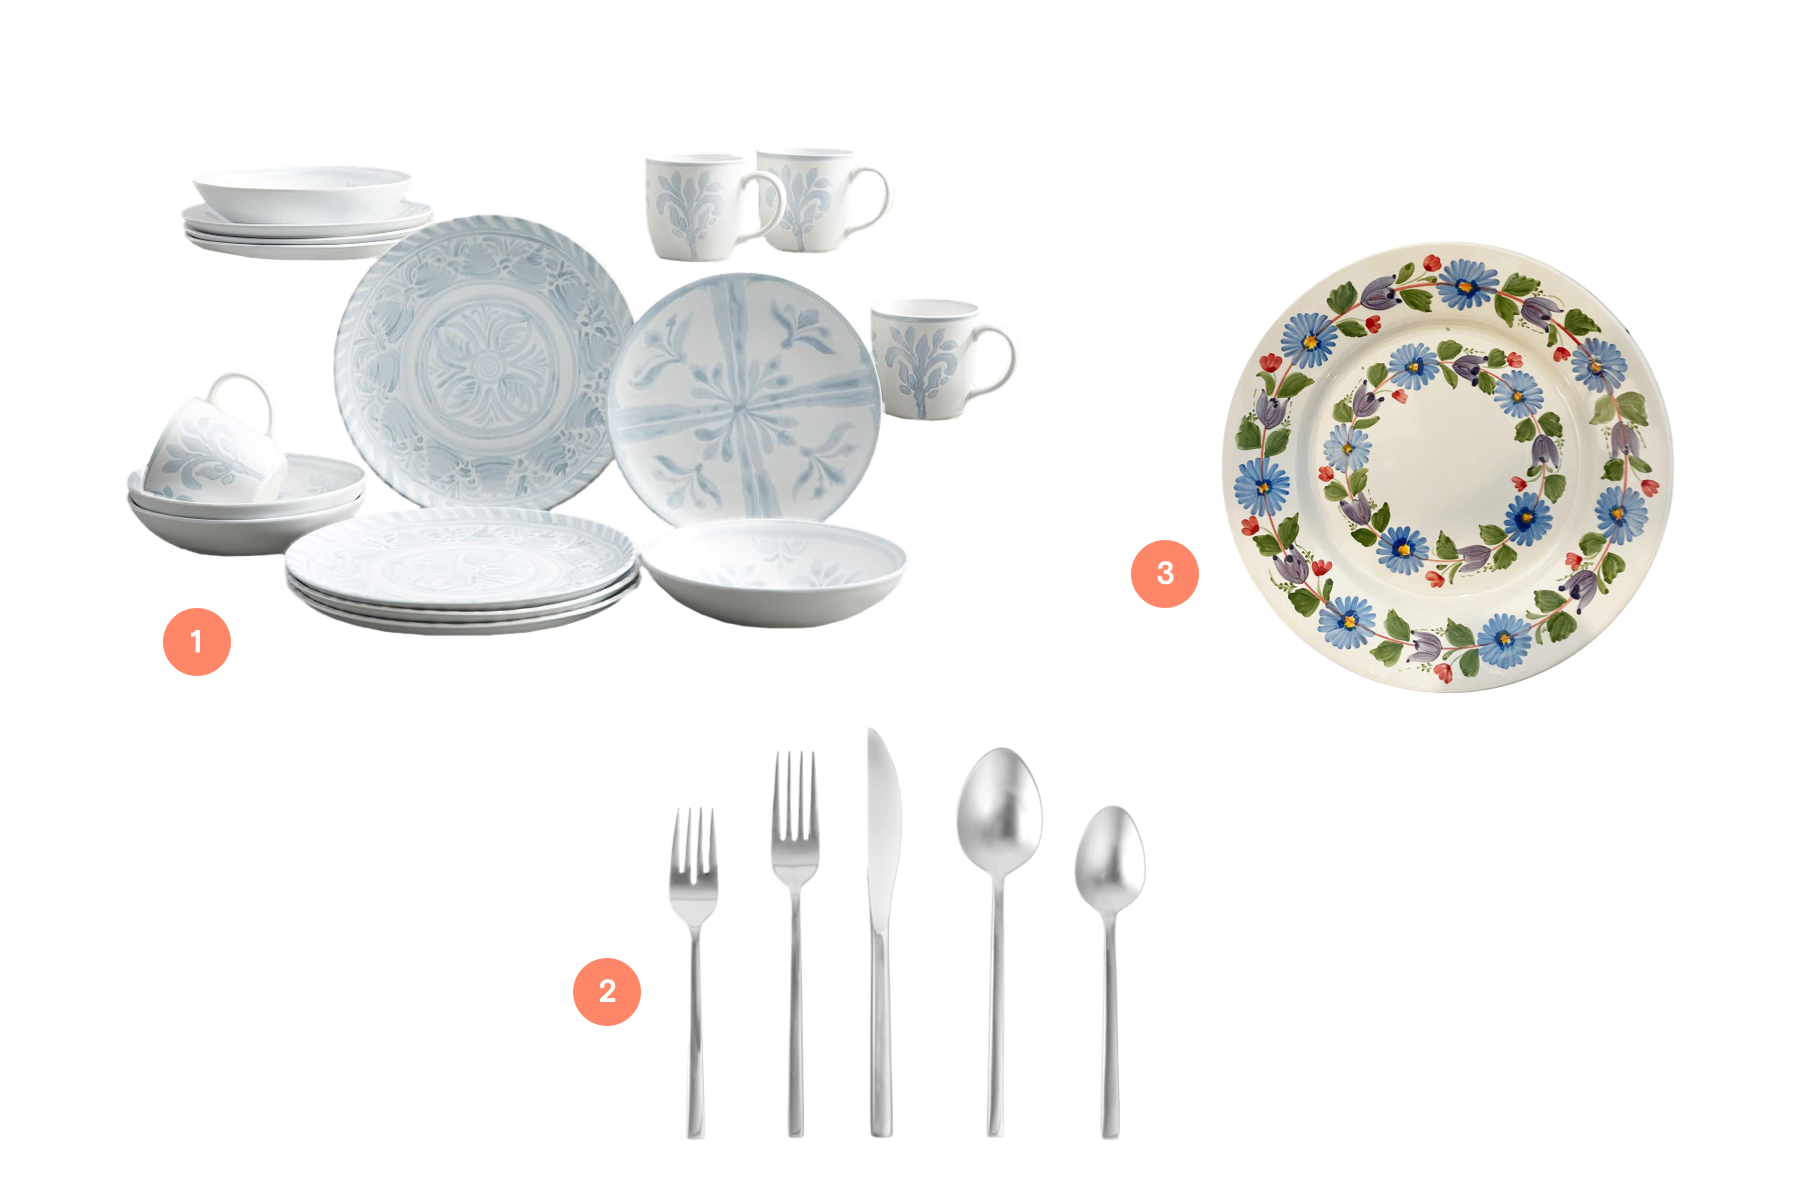 Dinnerware and silverware collections as discussed in the article.